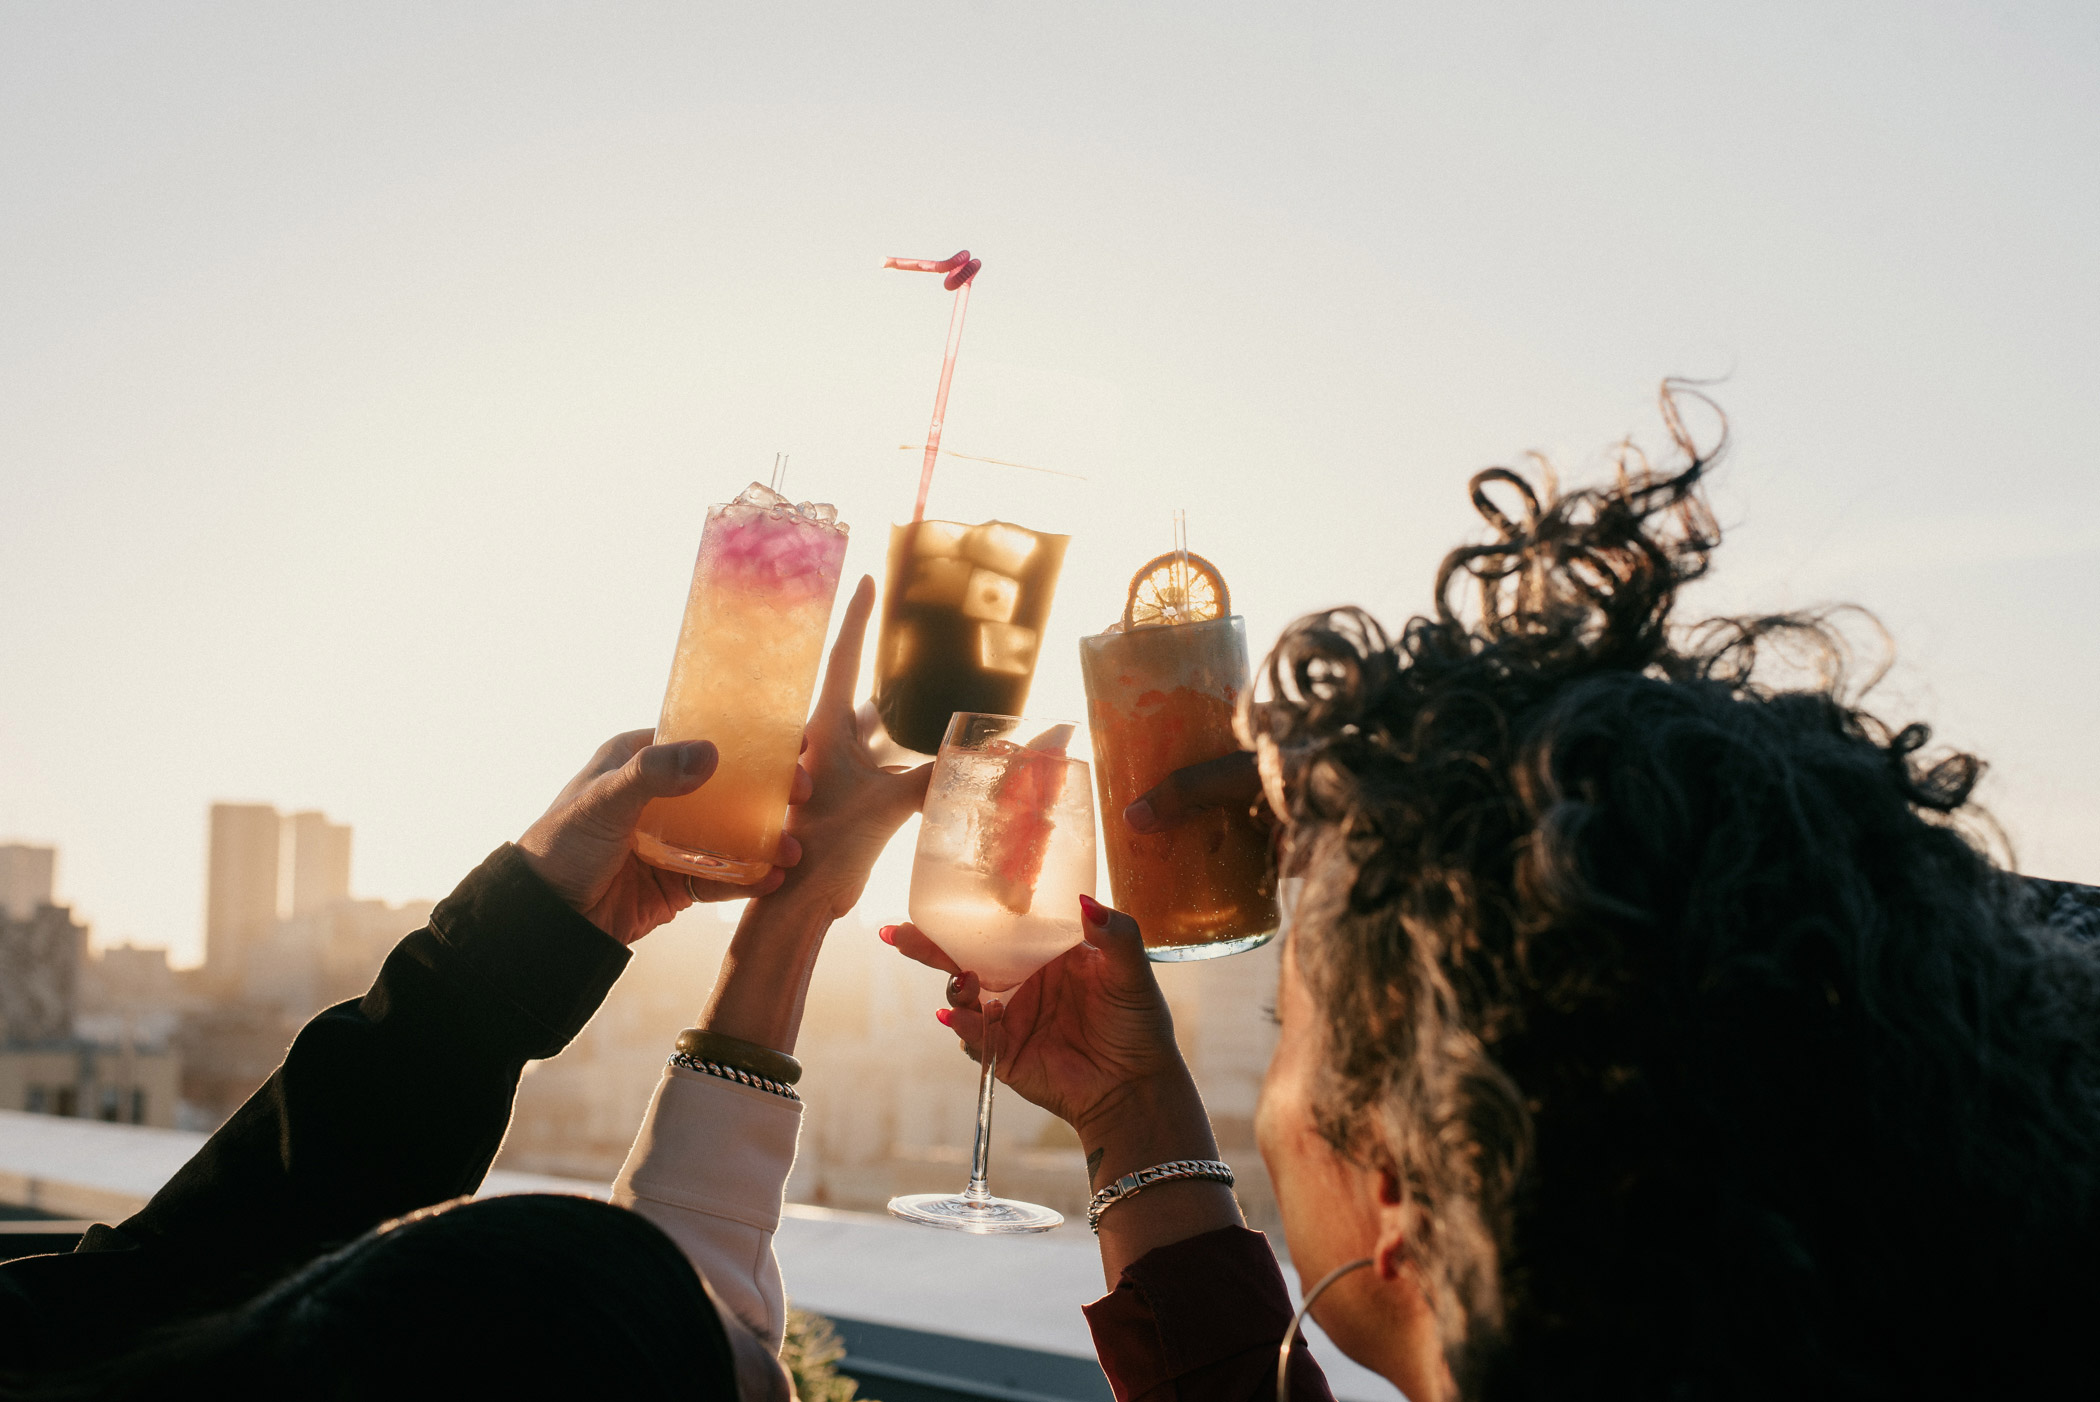 People lift their cocktail glasses skyward on the rooftop.